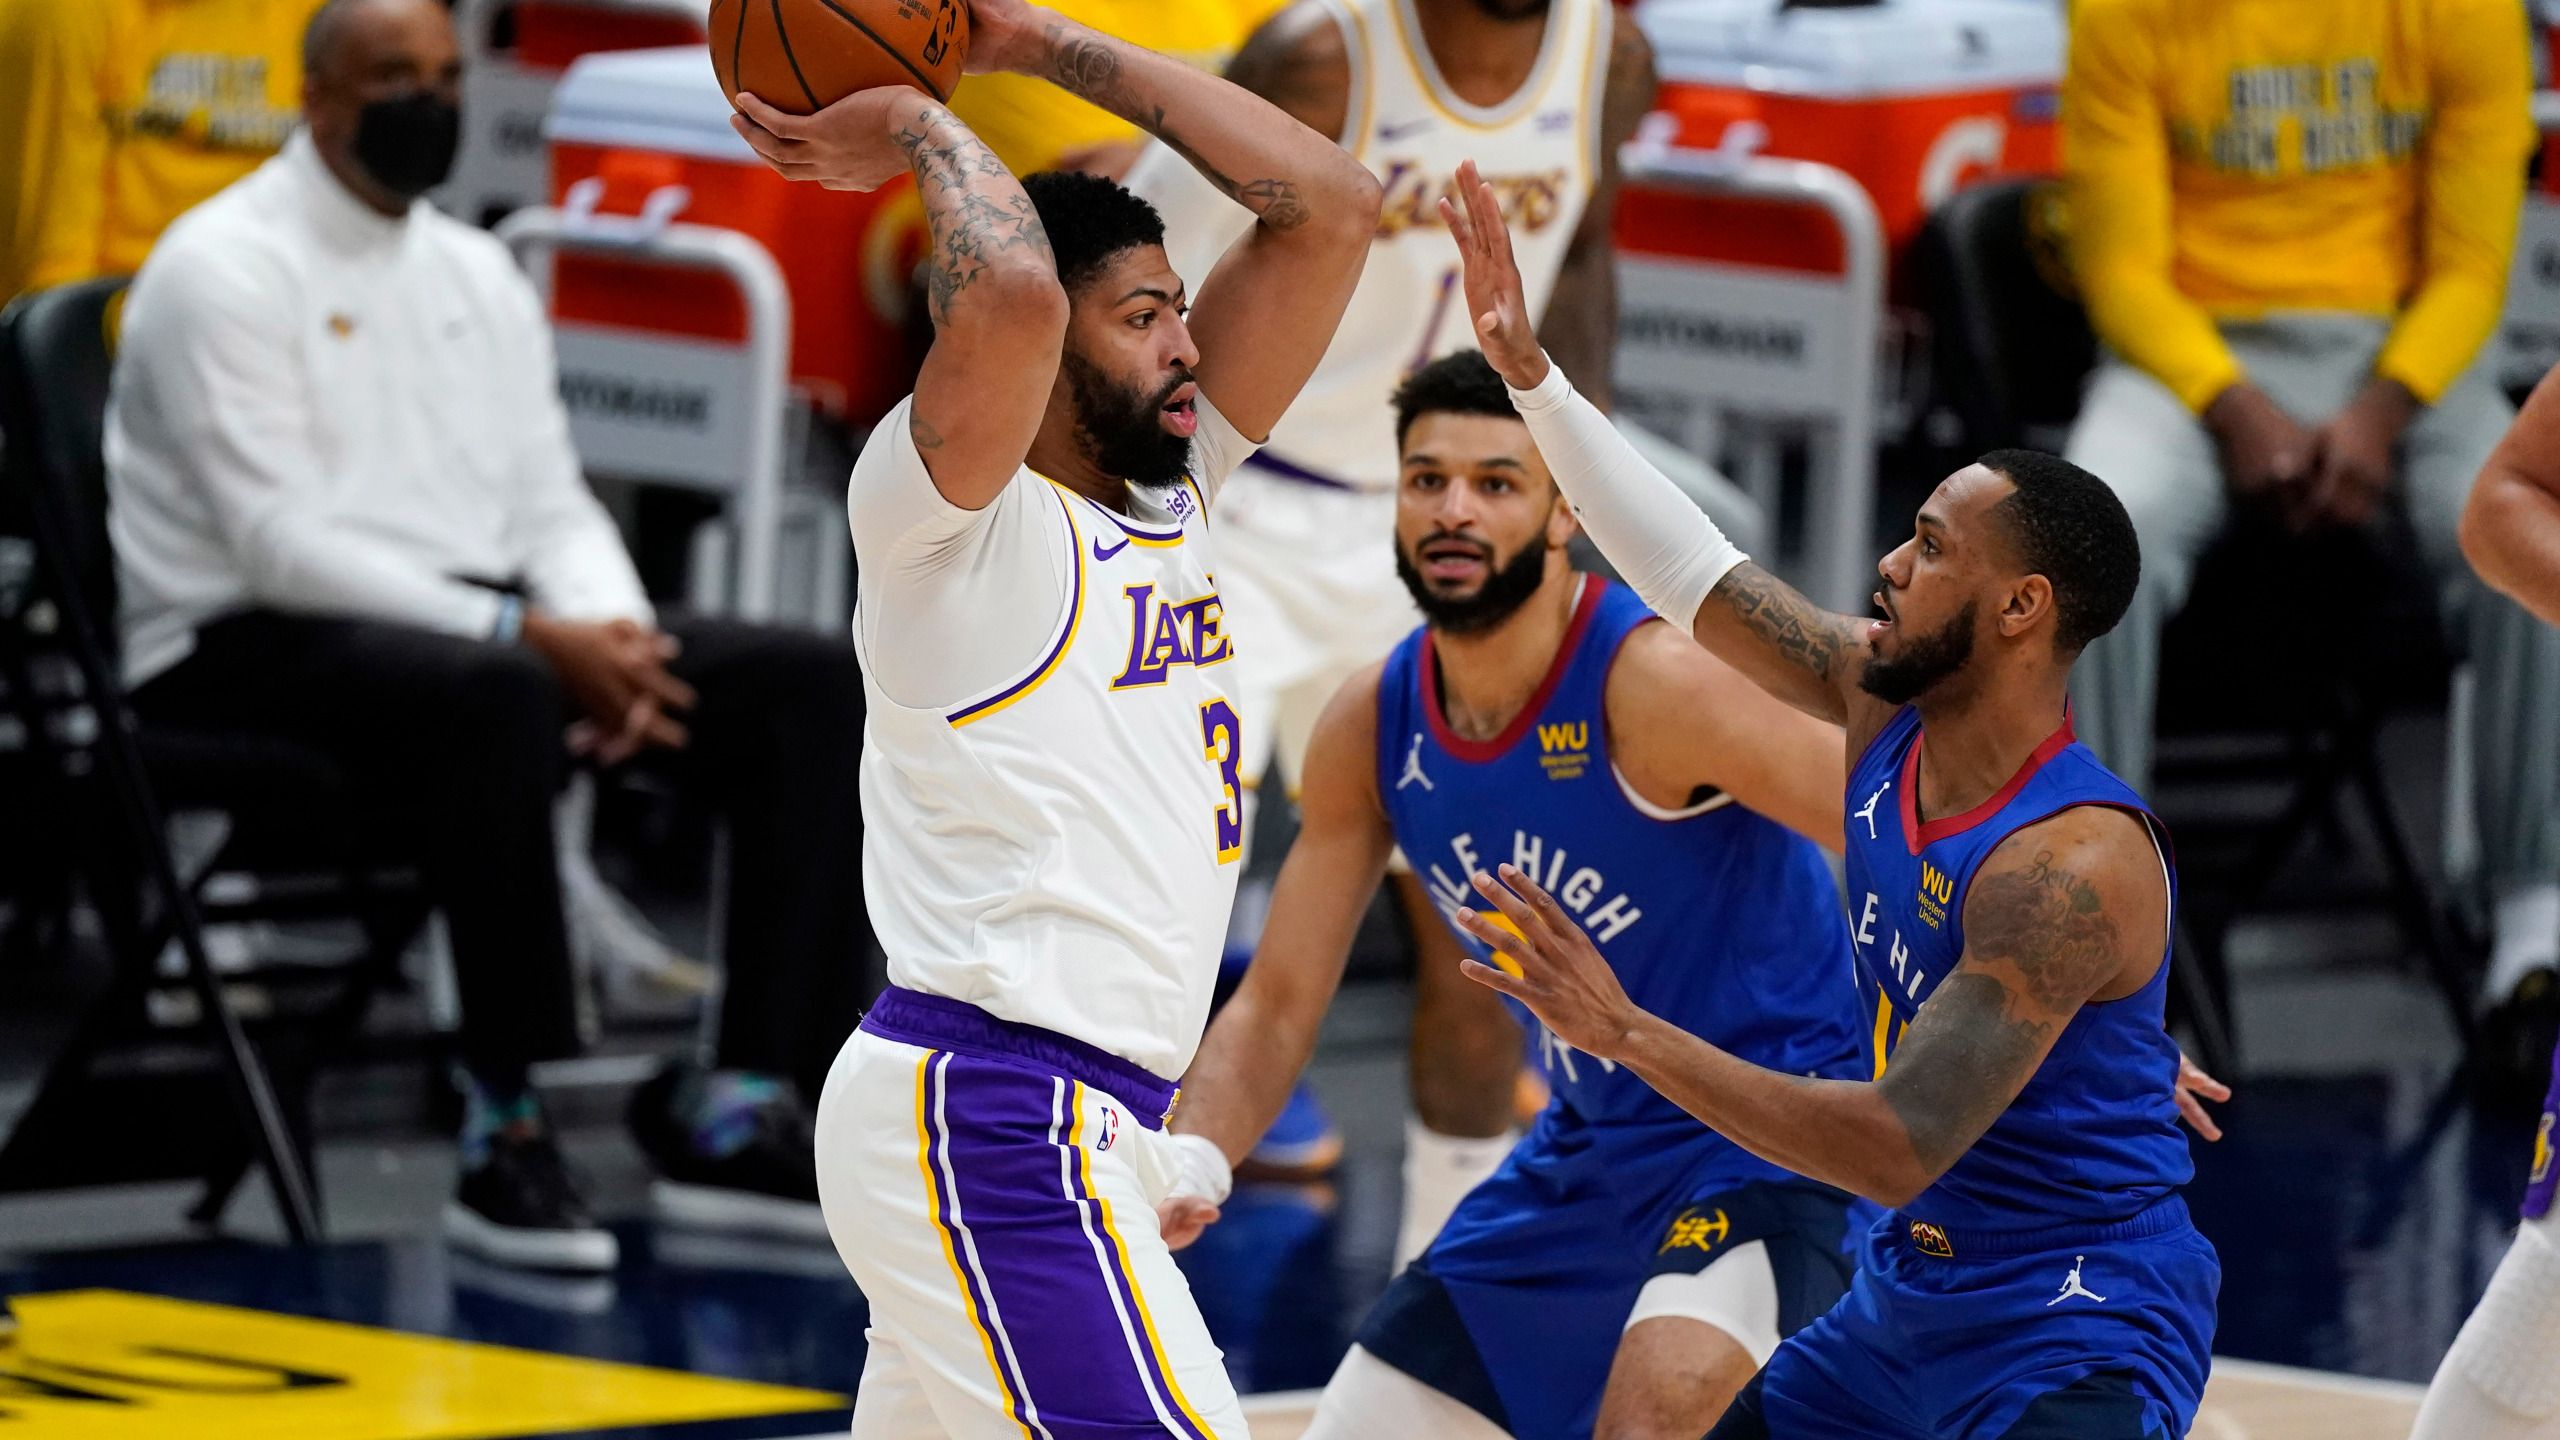 Lakers' Anthony Davis to rest injured Achilles; no rupture